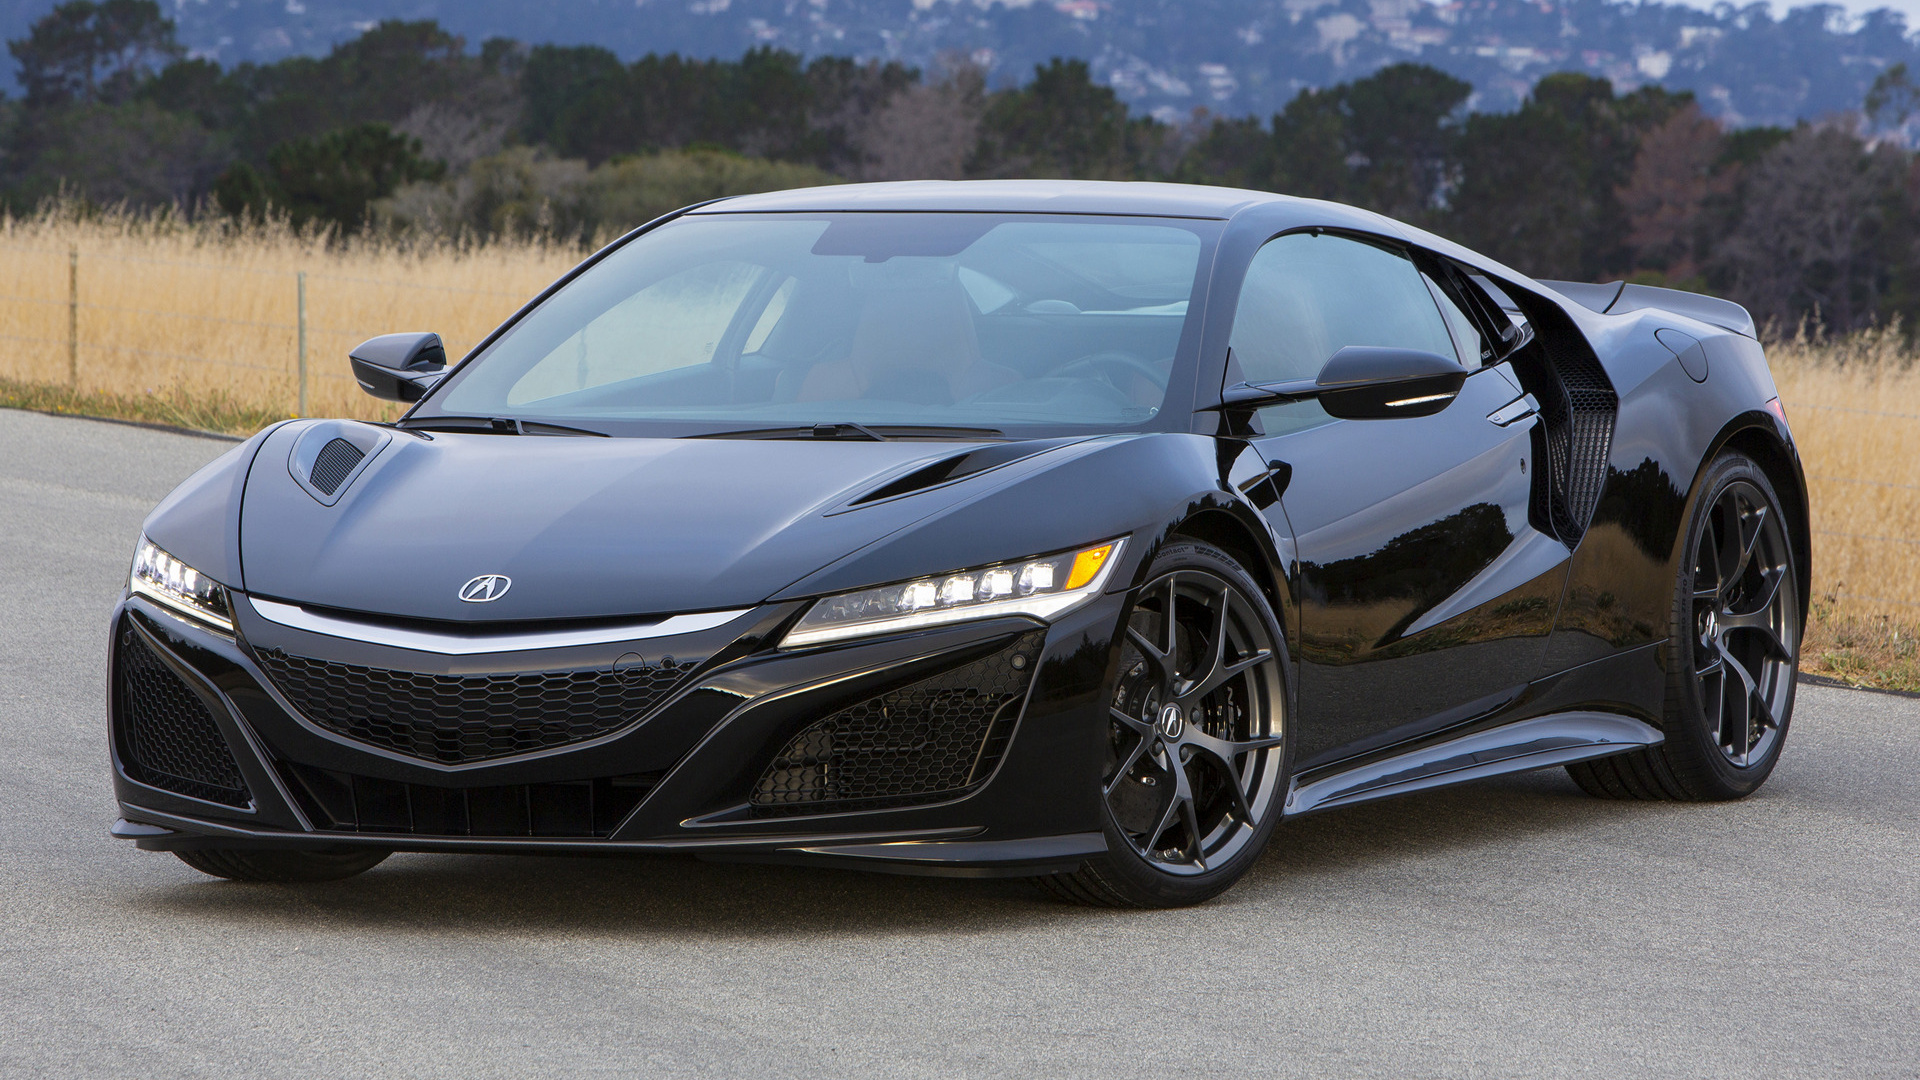 Acura NSX Coupe White Car Ultra HD Desktop Background Wallpaper for 4K UHD  TV  Widescreen  UltraWide Desktop  Laptop  Multi Display Dual Monitor   Tablet  Smartphone